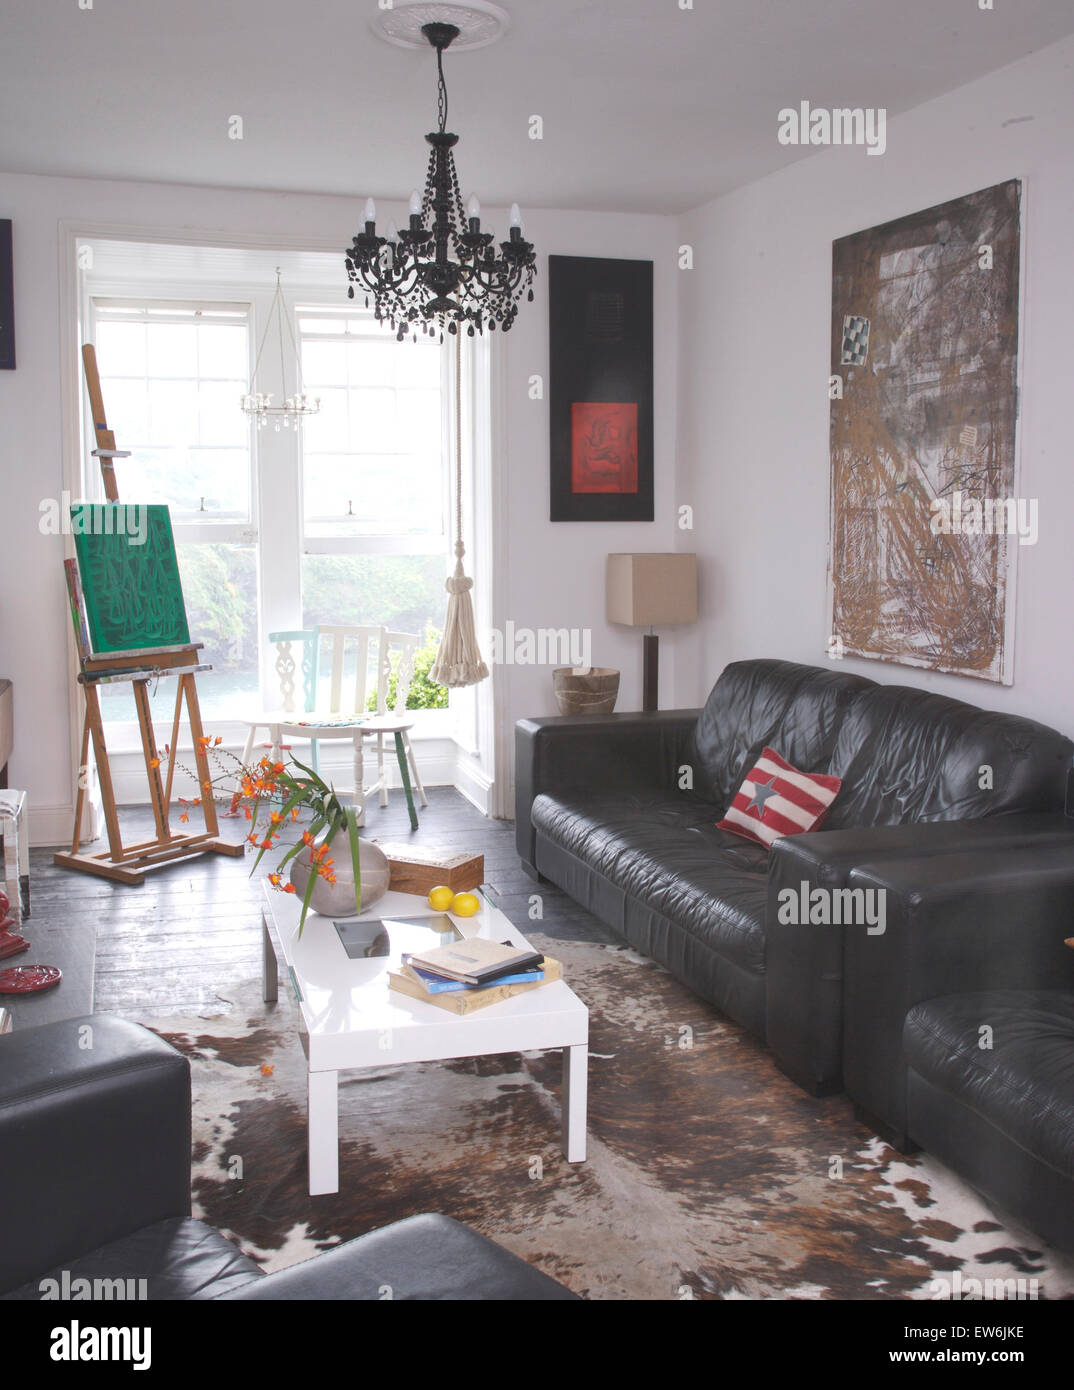 Black leather sofas and a white coffee table in artist's coastal living room with a vintage cow hide rug on floor Stock Photo